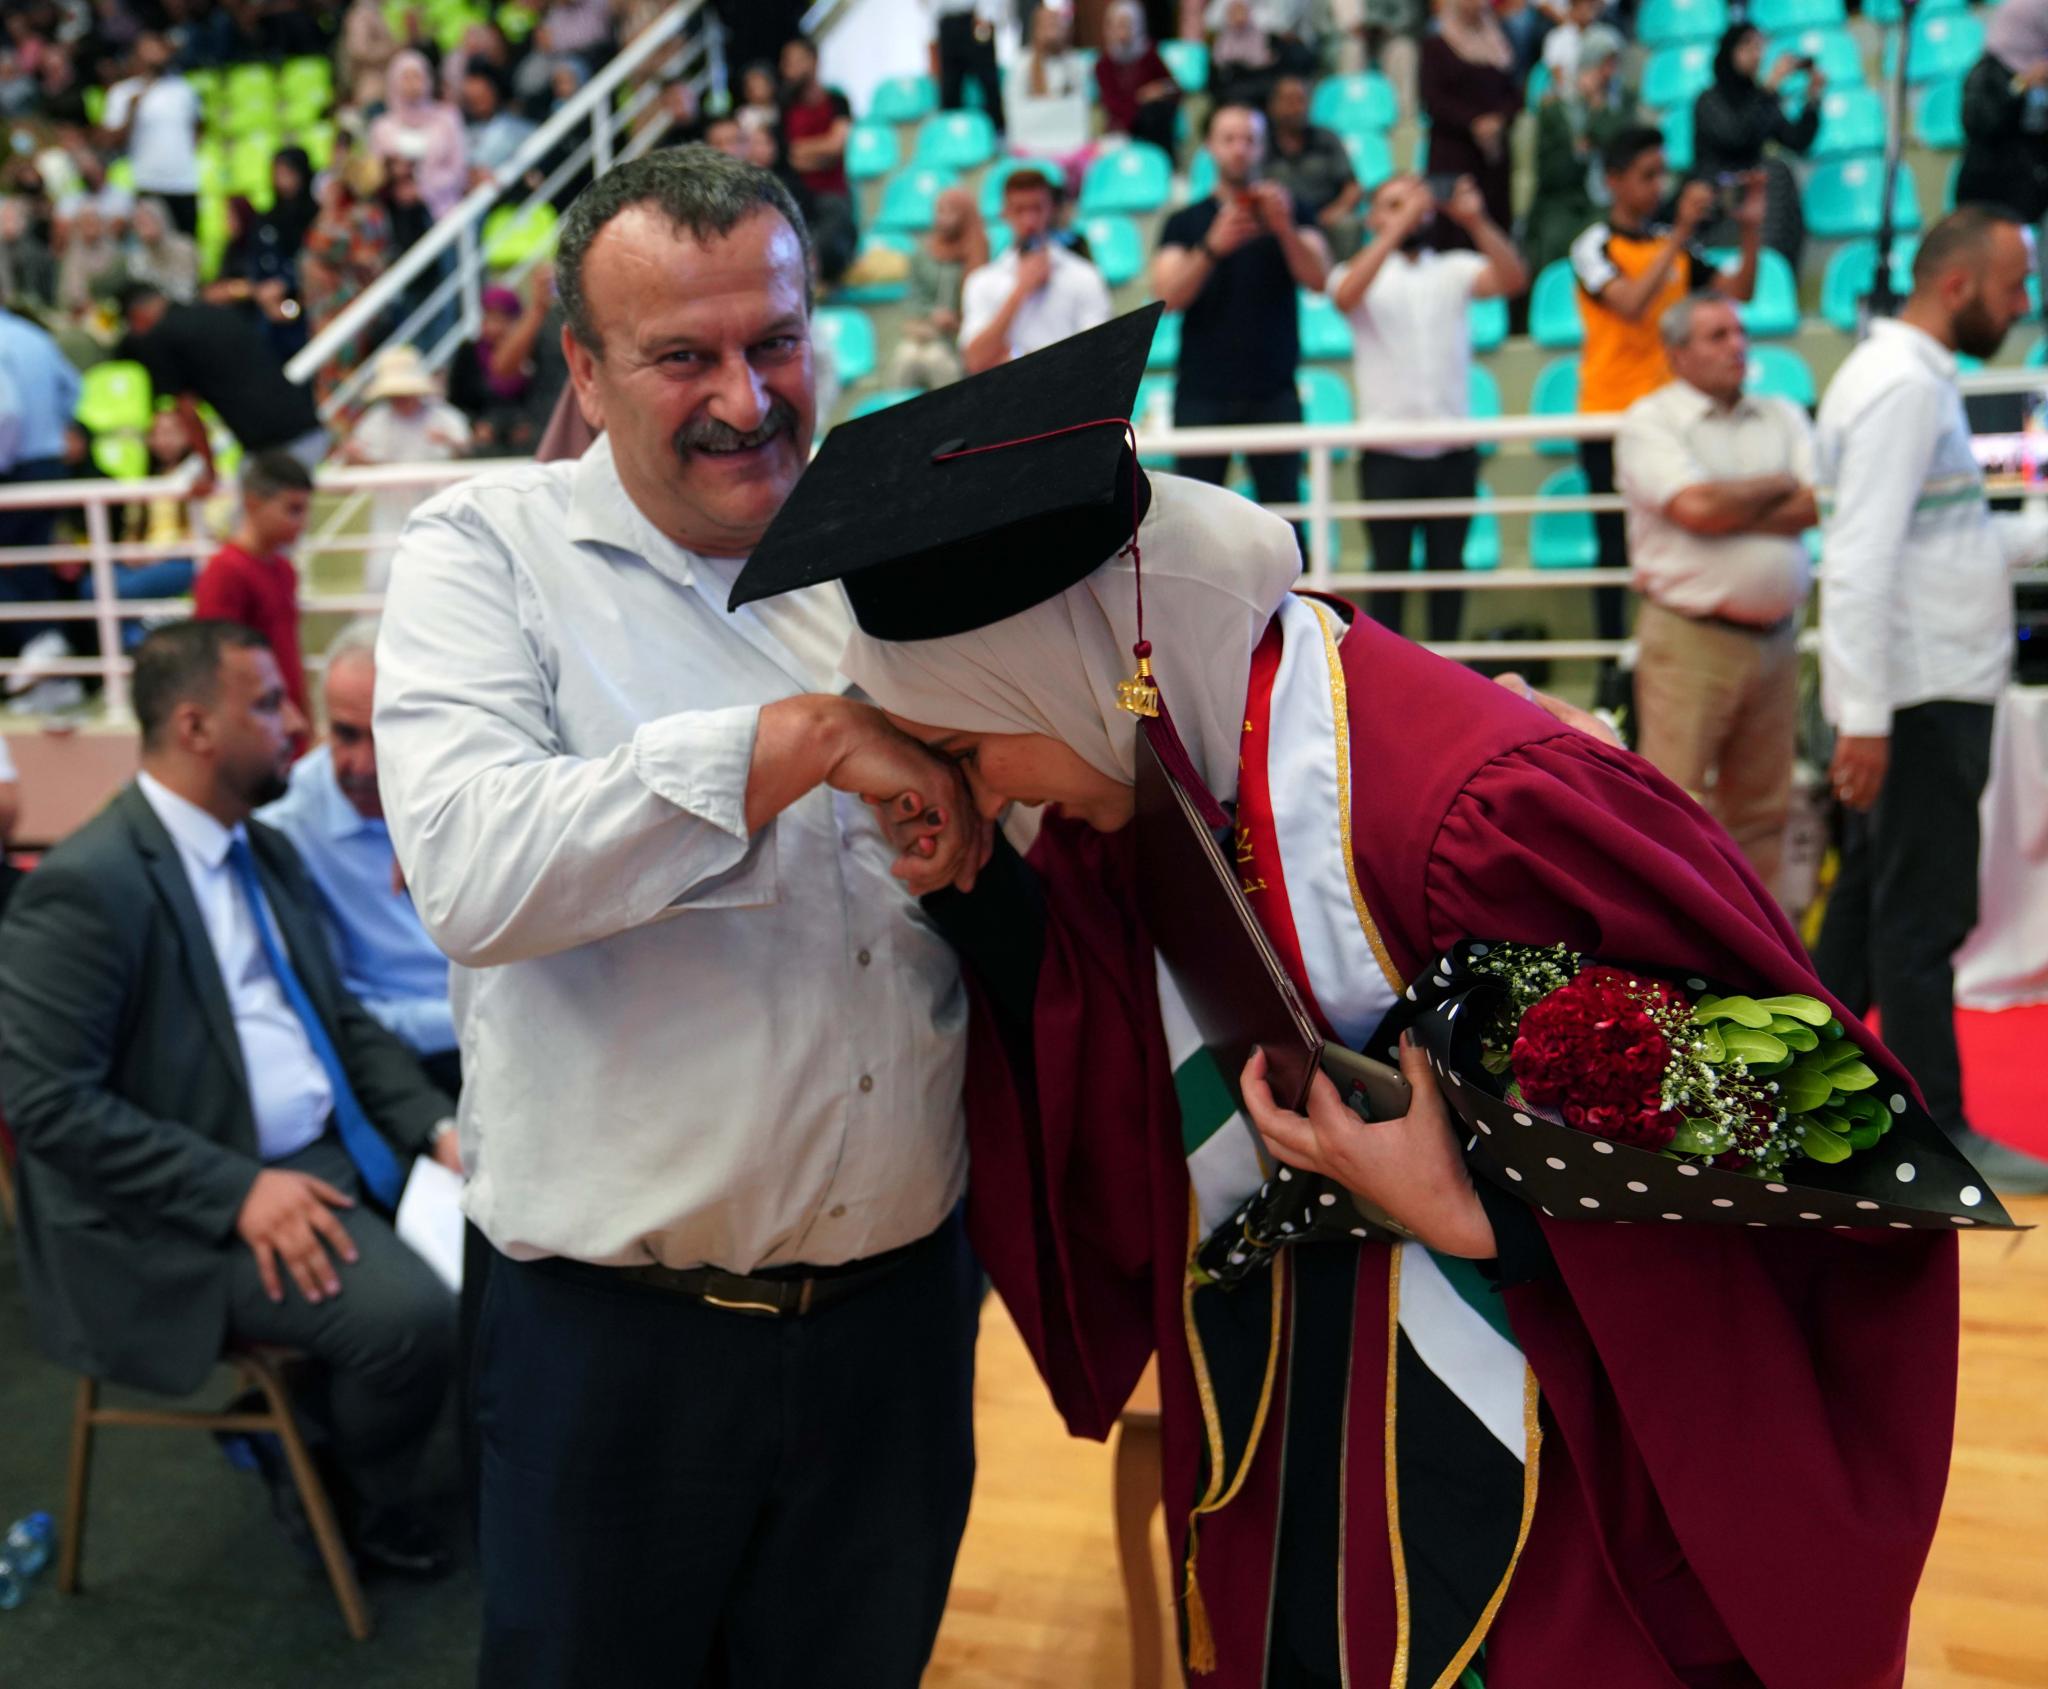 Graduation Ceremony of the 17th and 18th Cohorts